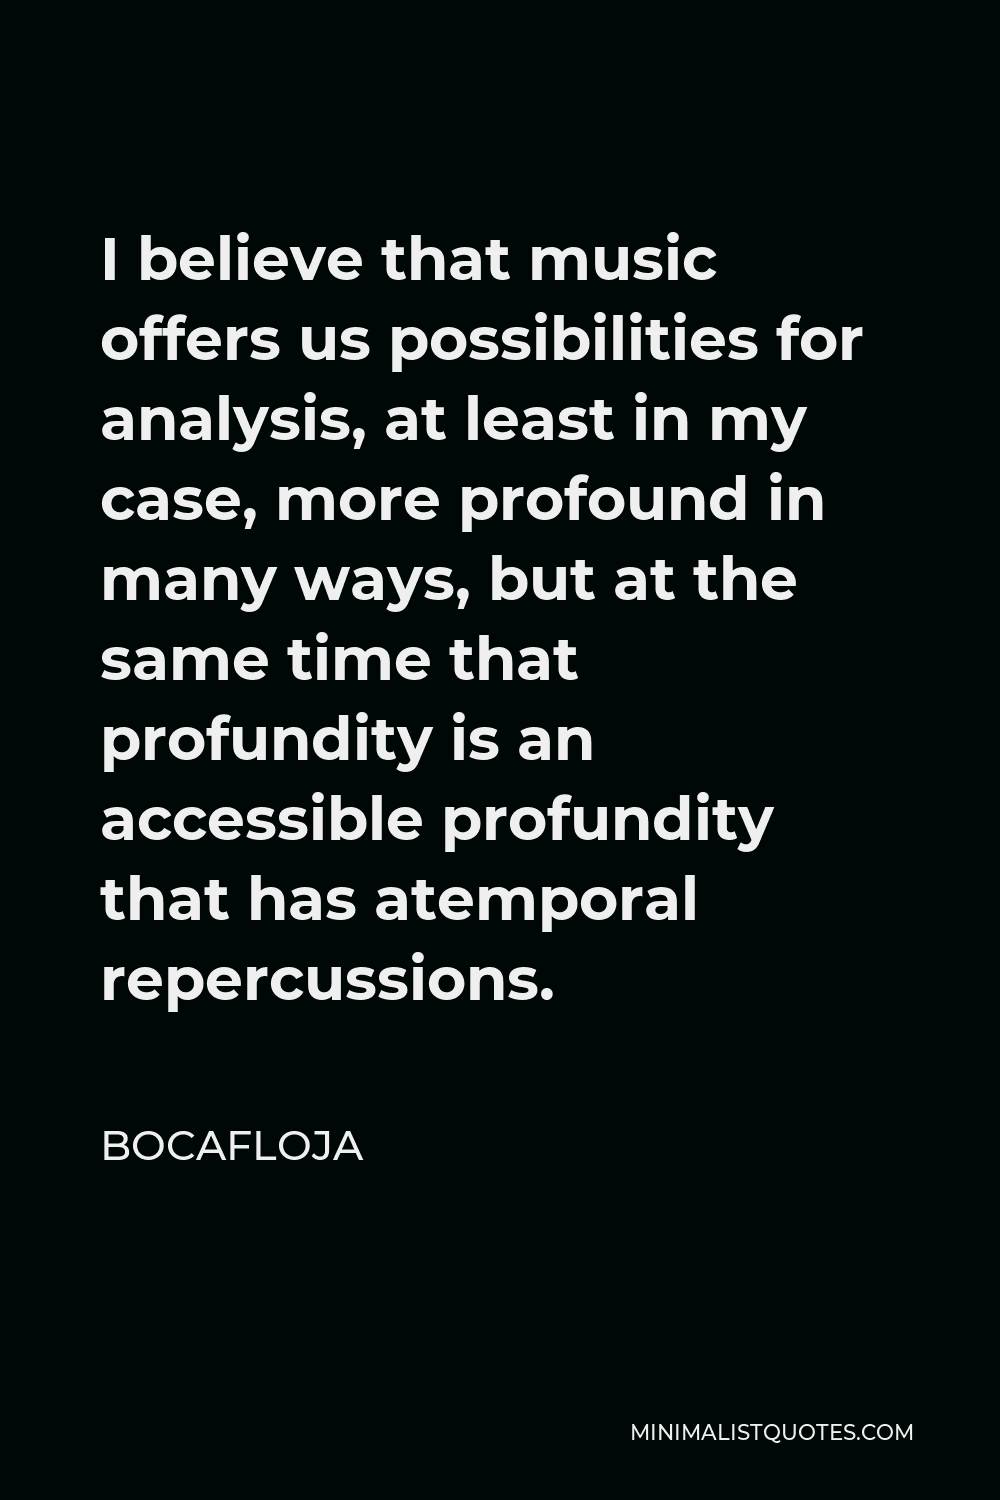 Bocafloja Quote - I believe that music offers us possibilities for analysis, at least in my case, more profound in many ways, but at the same time that profundity is an accessible profundity that has atemporal repercussions.